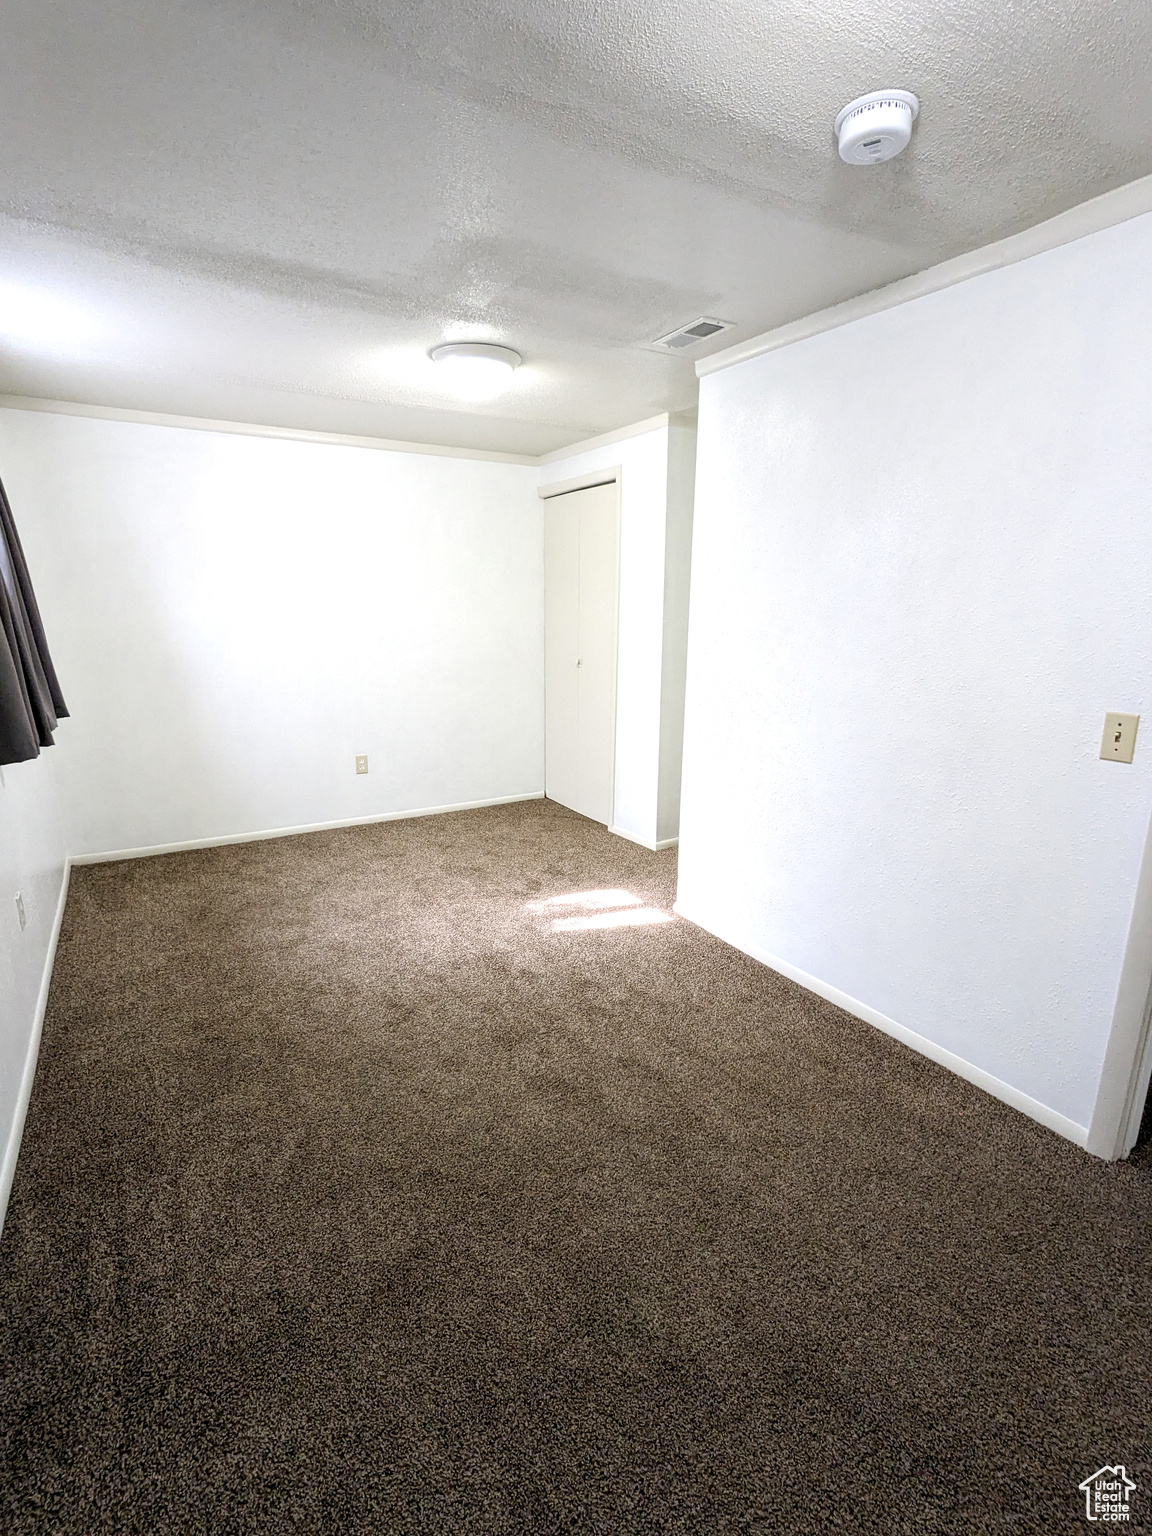 Empty room with carpet flooring and a textured ceiling